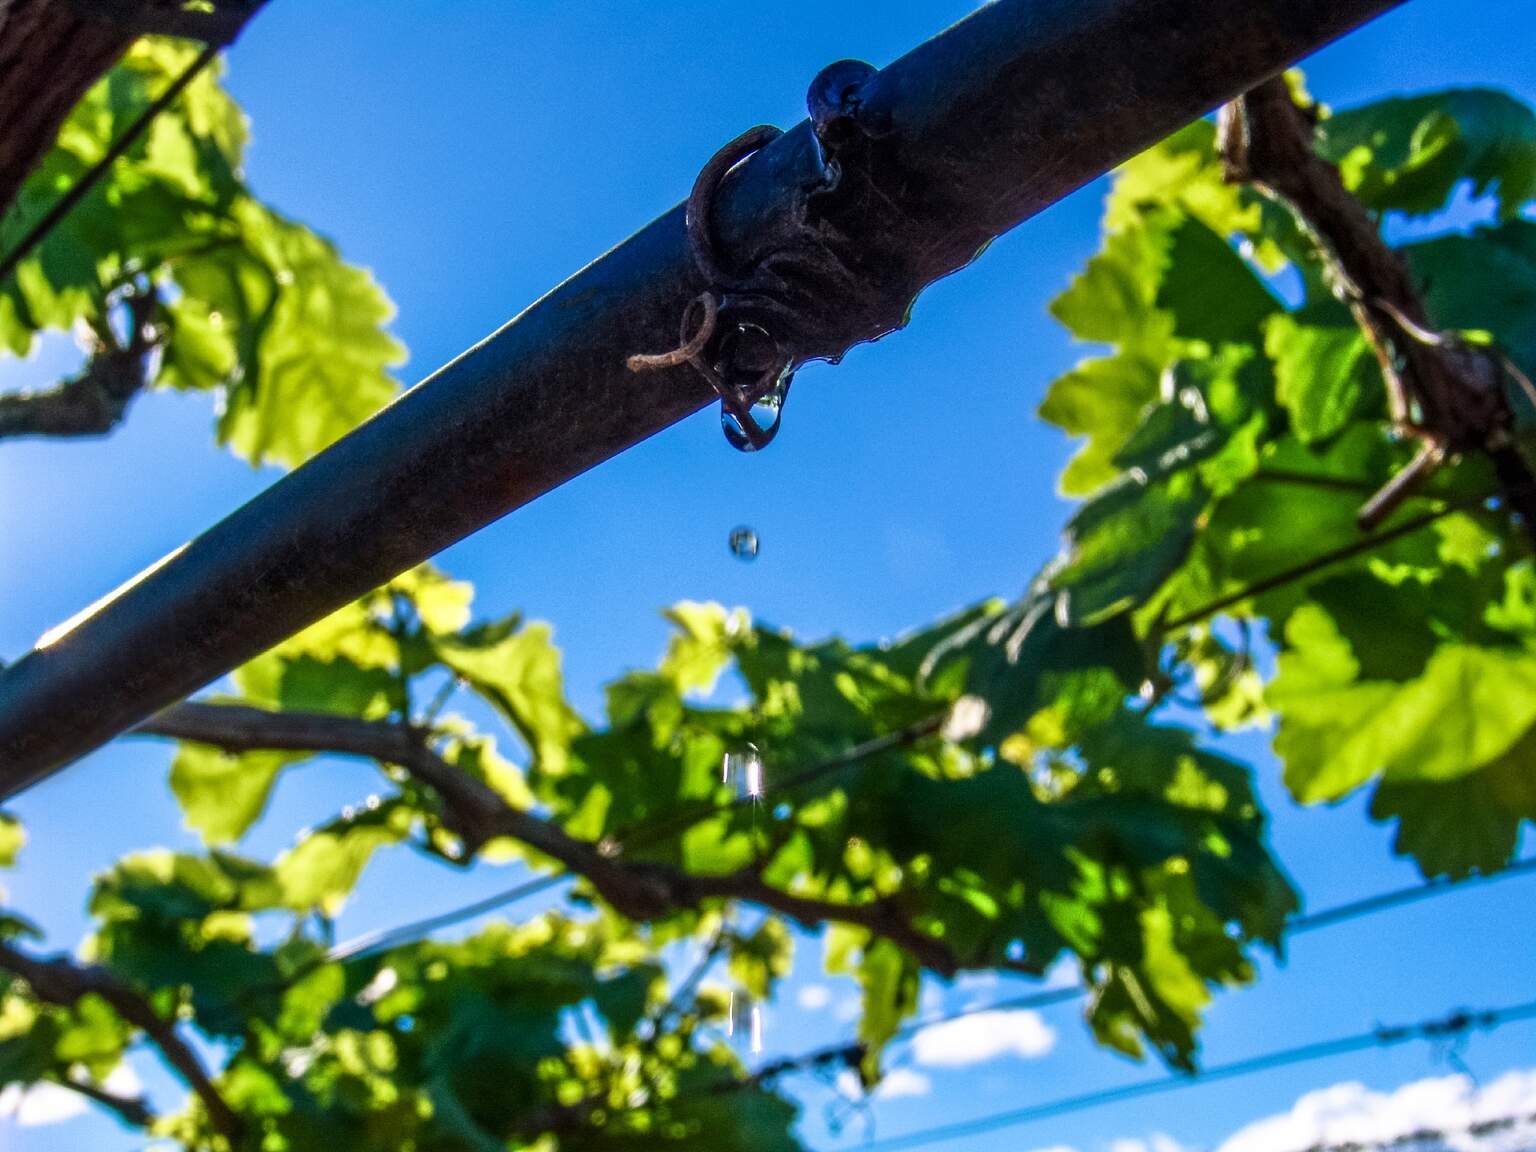 This vital equipment enables wine producers and growers in Mendoza essential access to consistent, reliable and efficient water allocation to their fields.